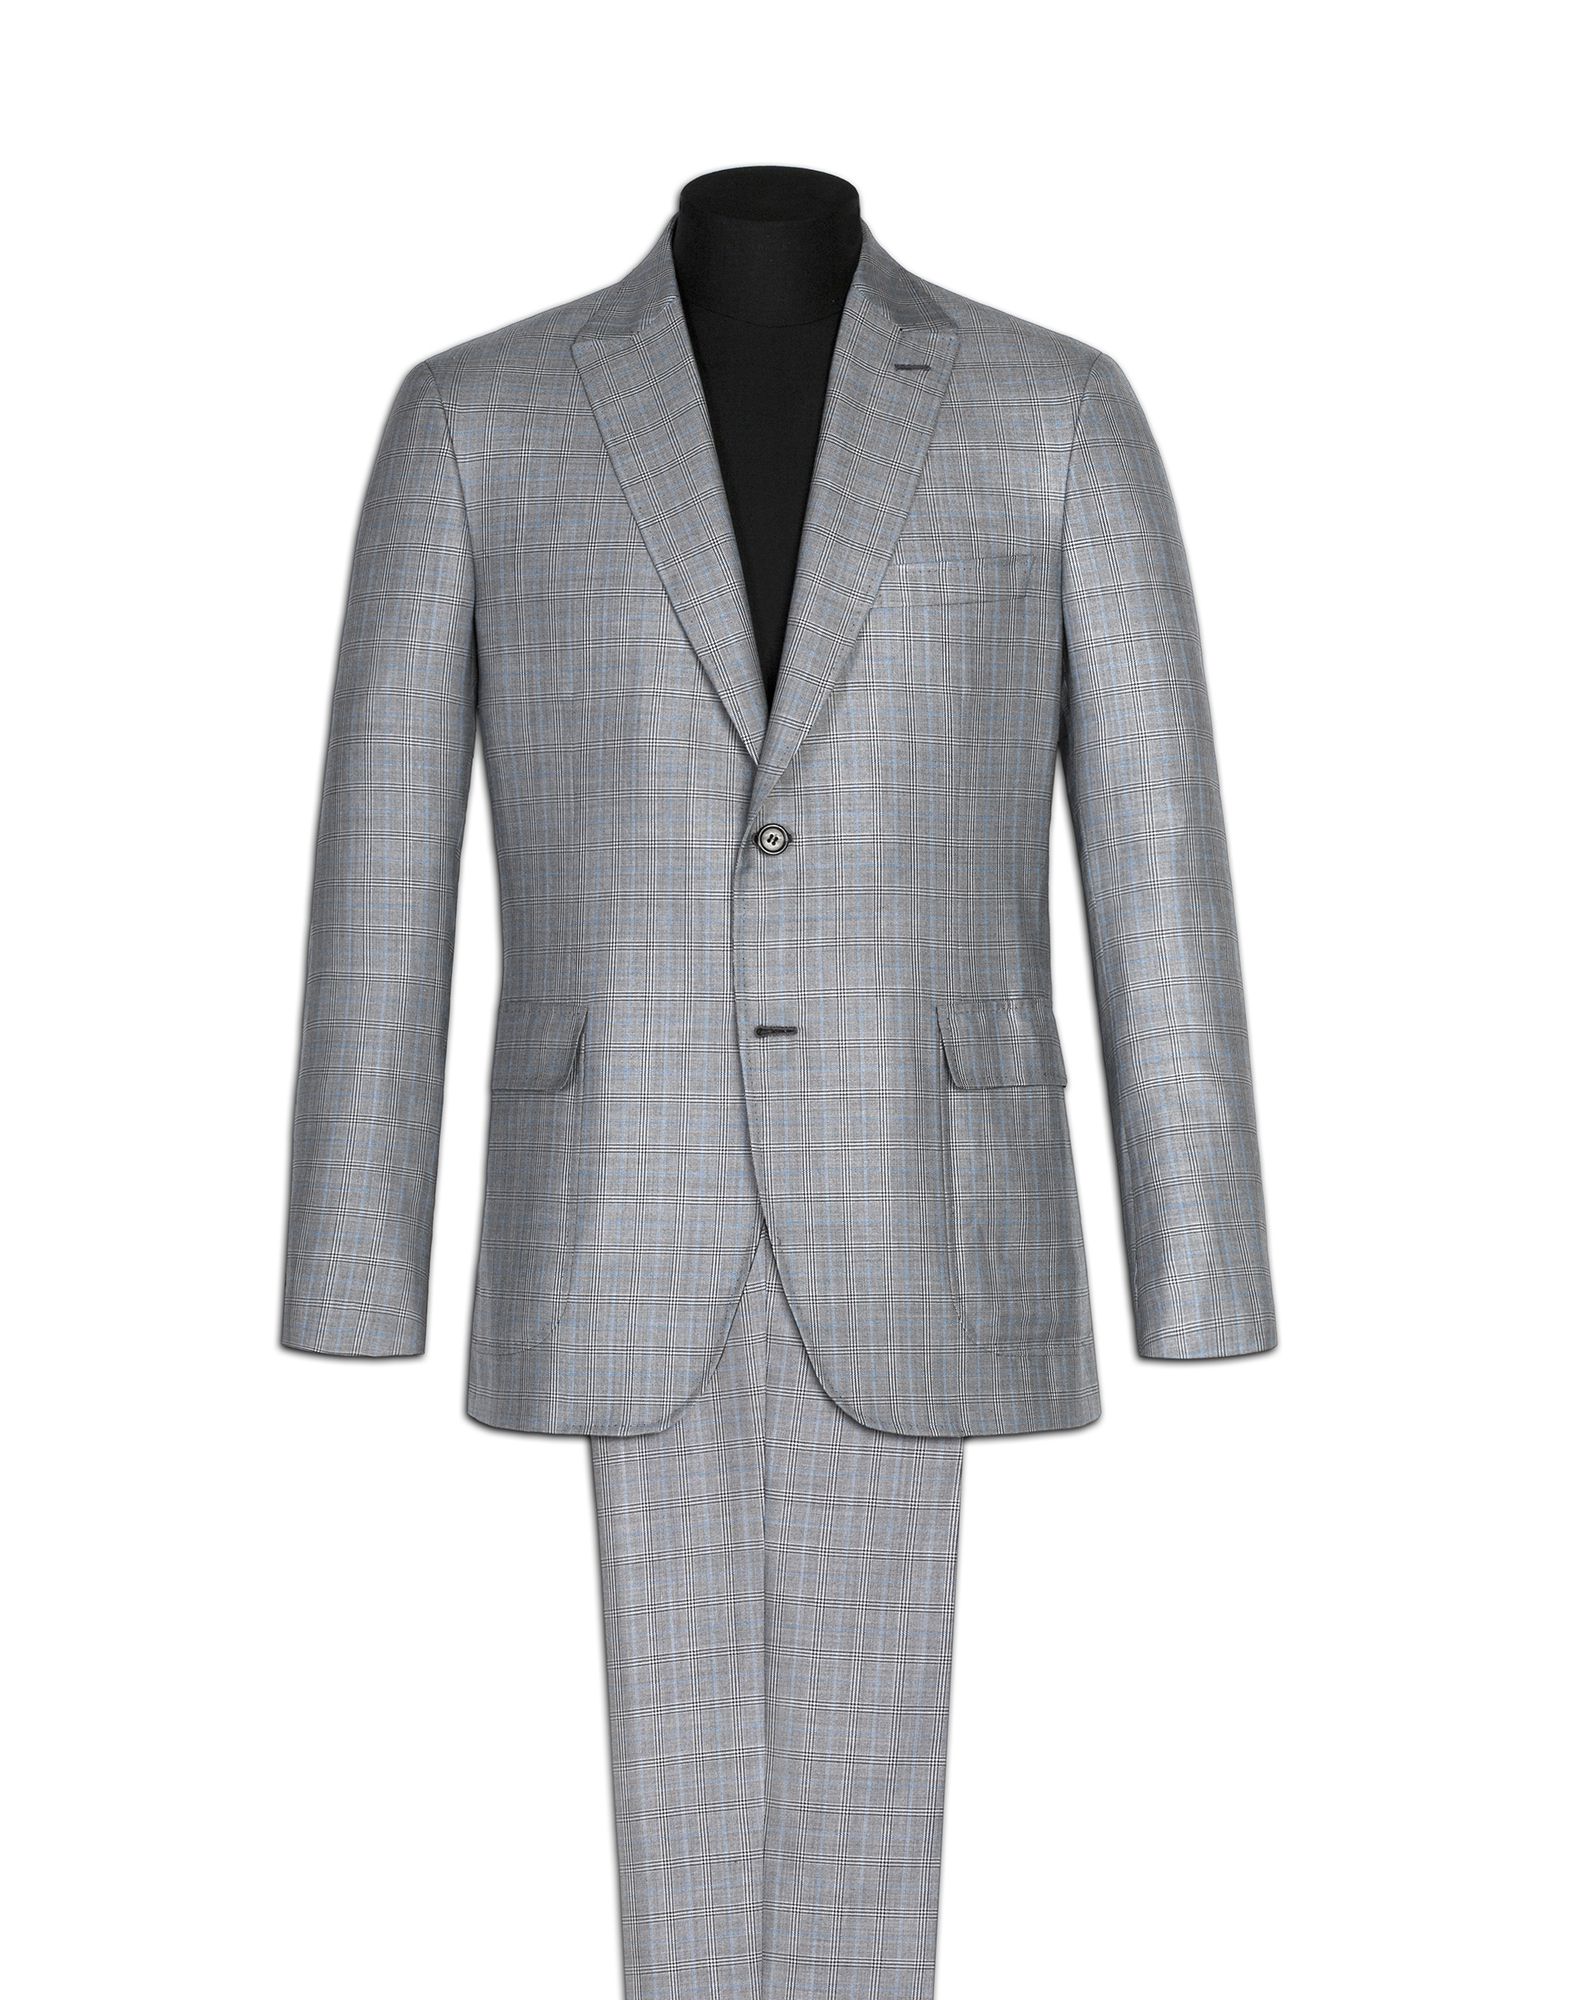 Brioni Spring 2016 Collection - InsideHook